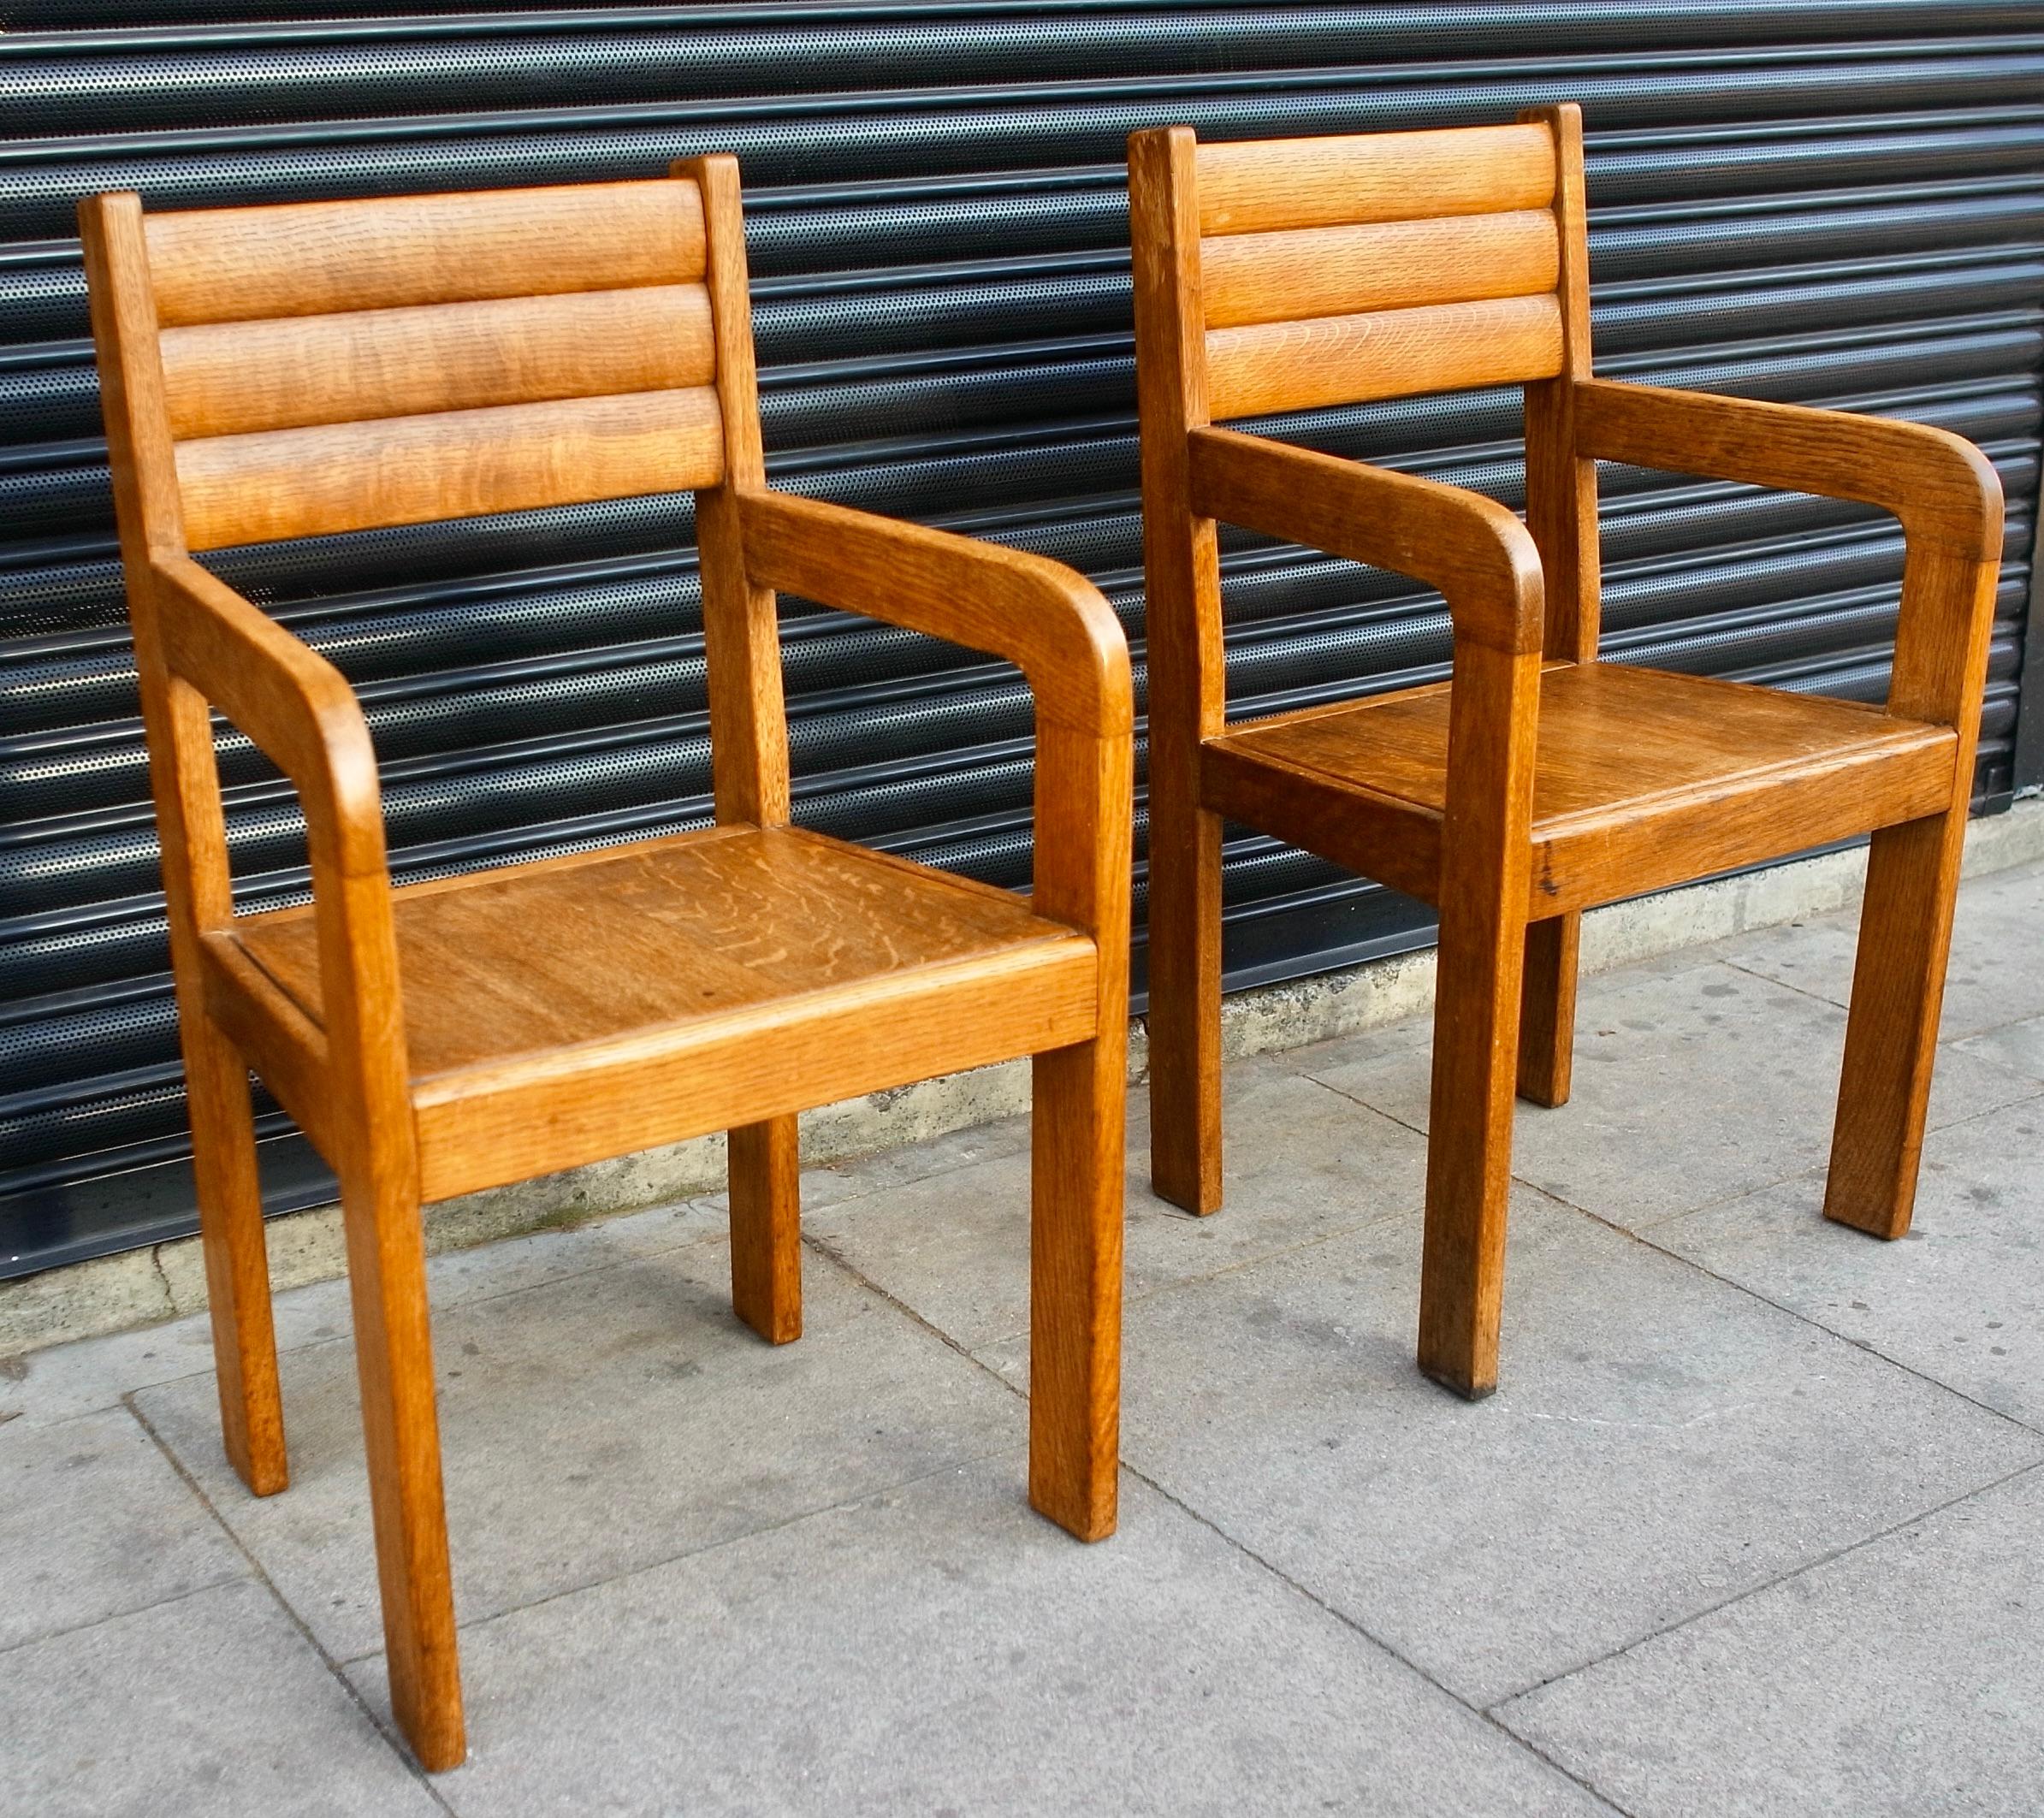 Pair of 1940s Handmade English Oak Vintage Carver/Side Chairs For Sale 5